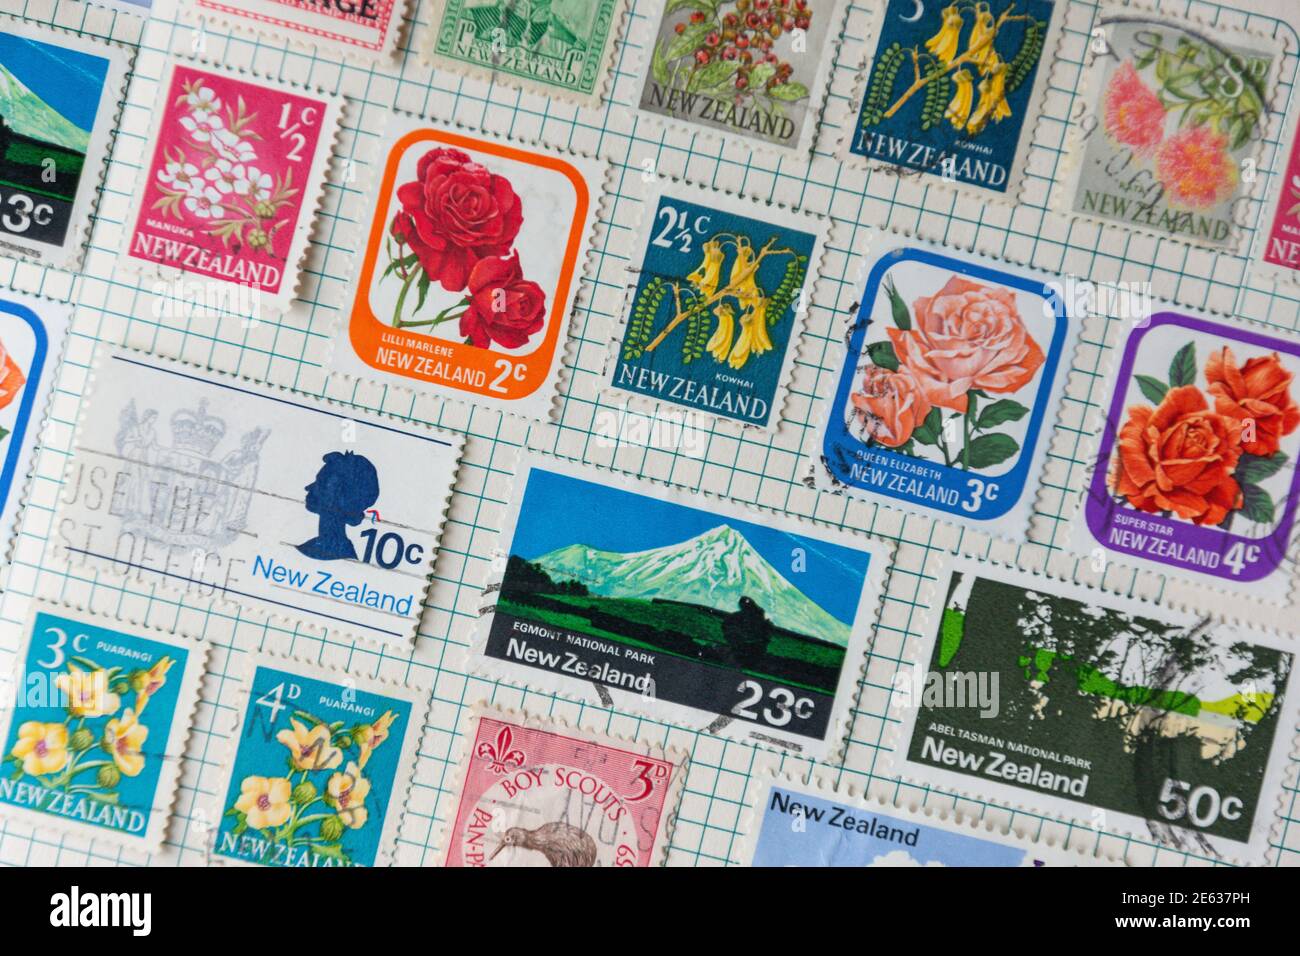 New Zealand stamp collection in album, Greater London, England, United Kingdom Stock Photo